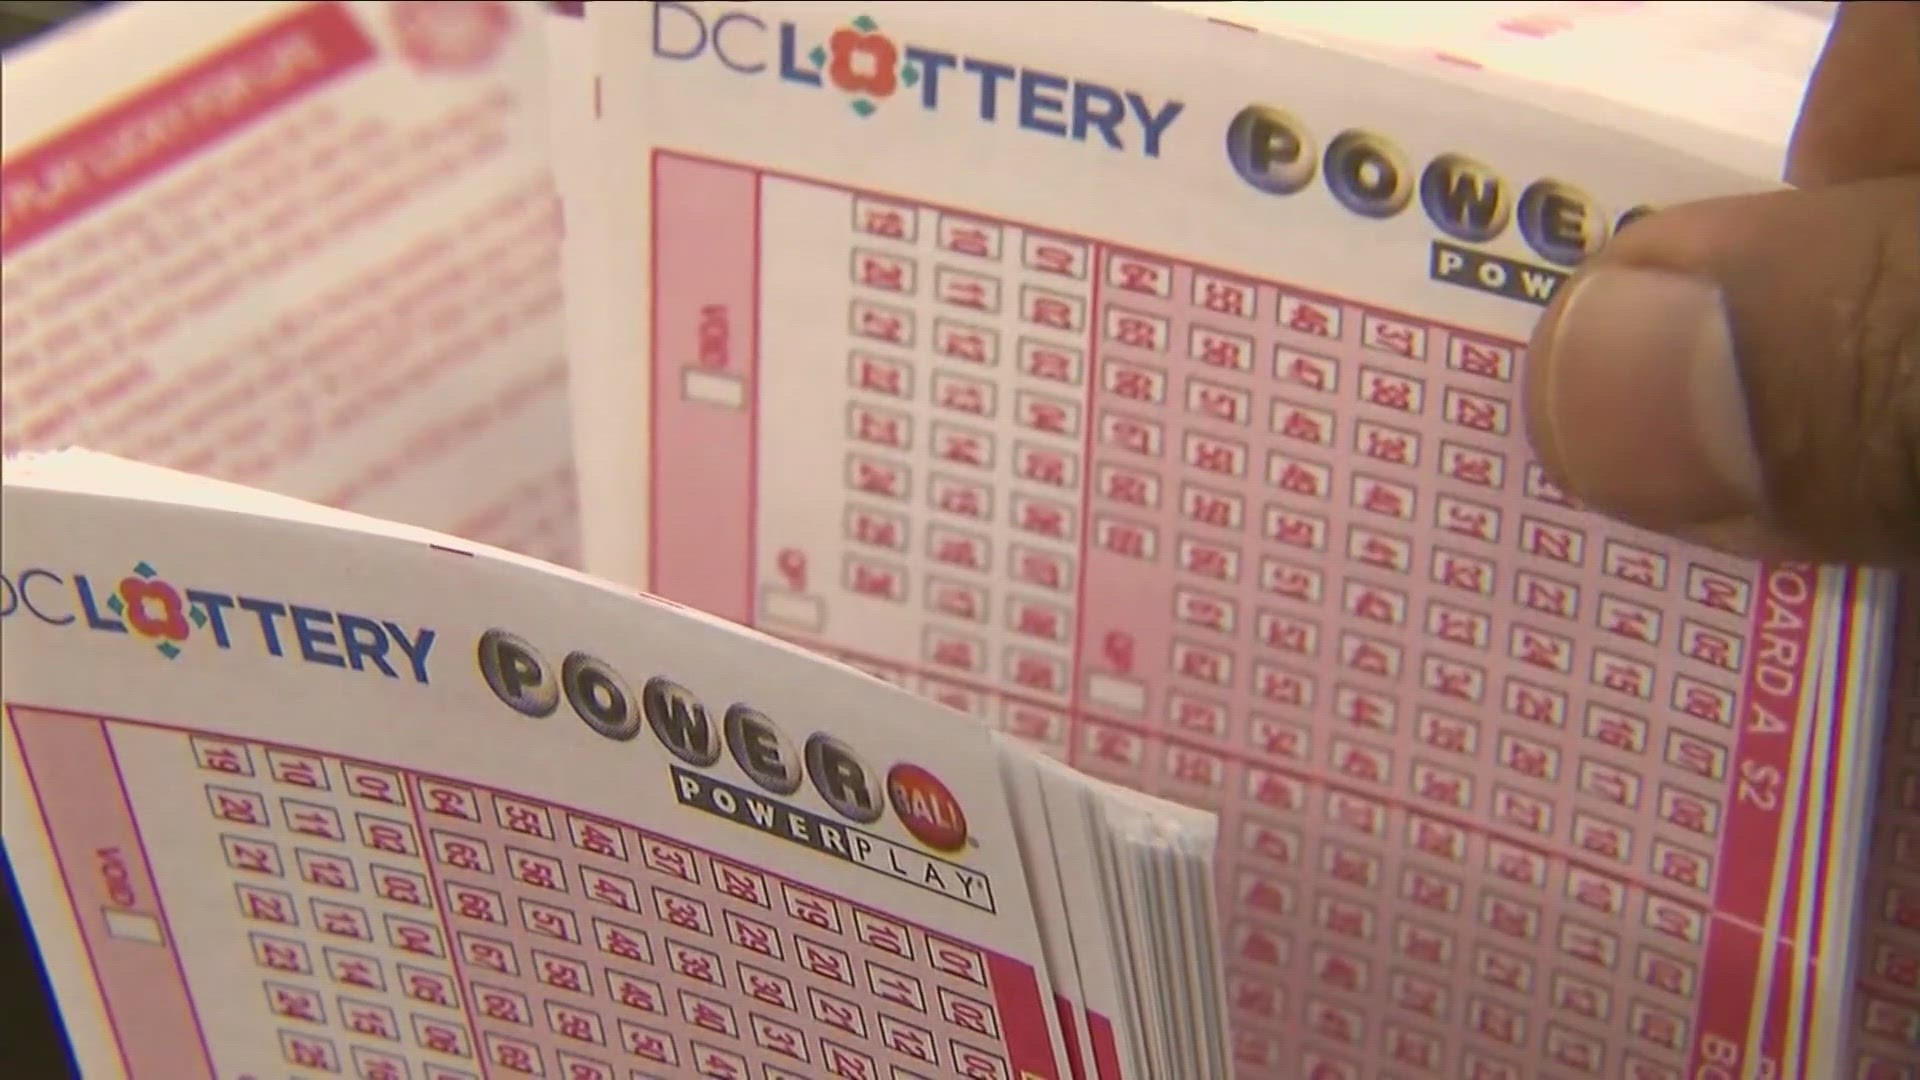 No one matched all six numbers from this weekend's Powerball drawing, bringing the jackpot up to $1 billion. The drawing happens Monday night at 10.